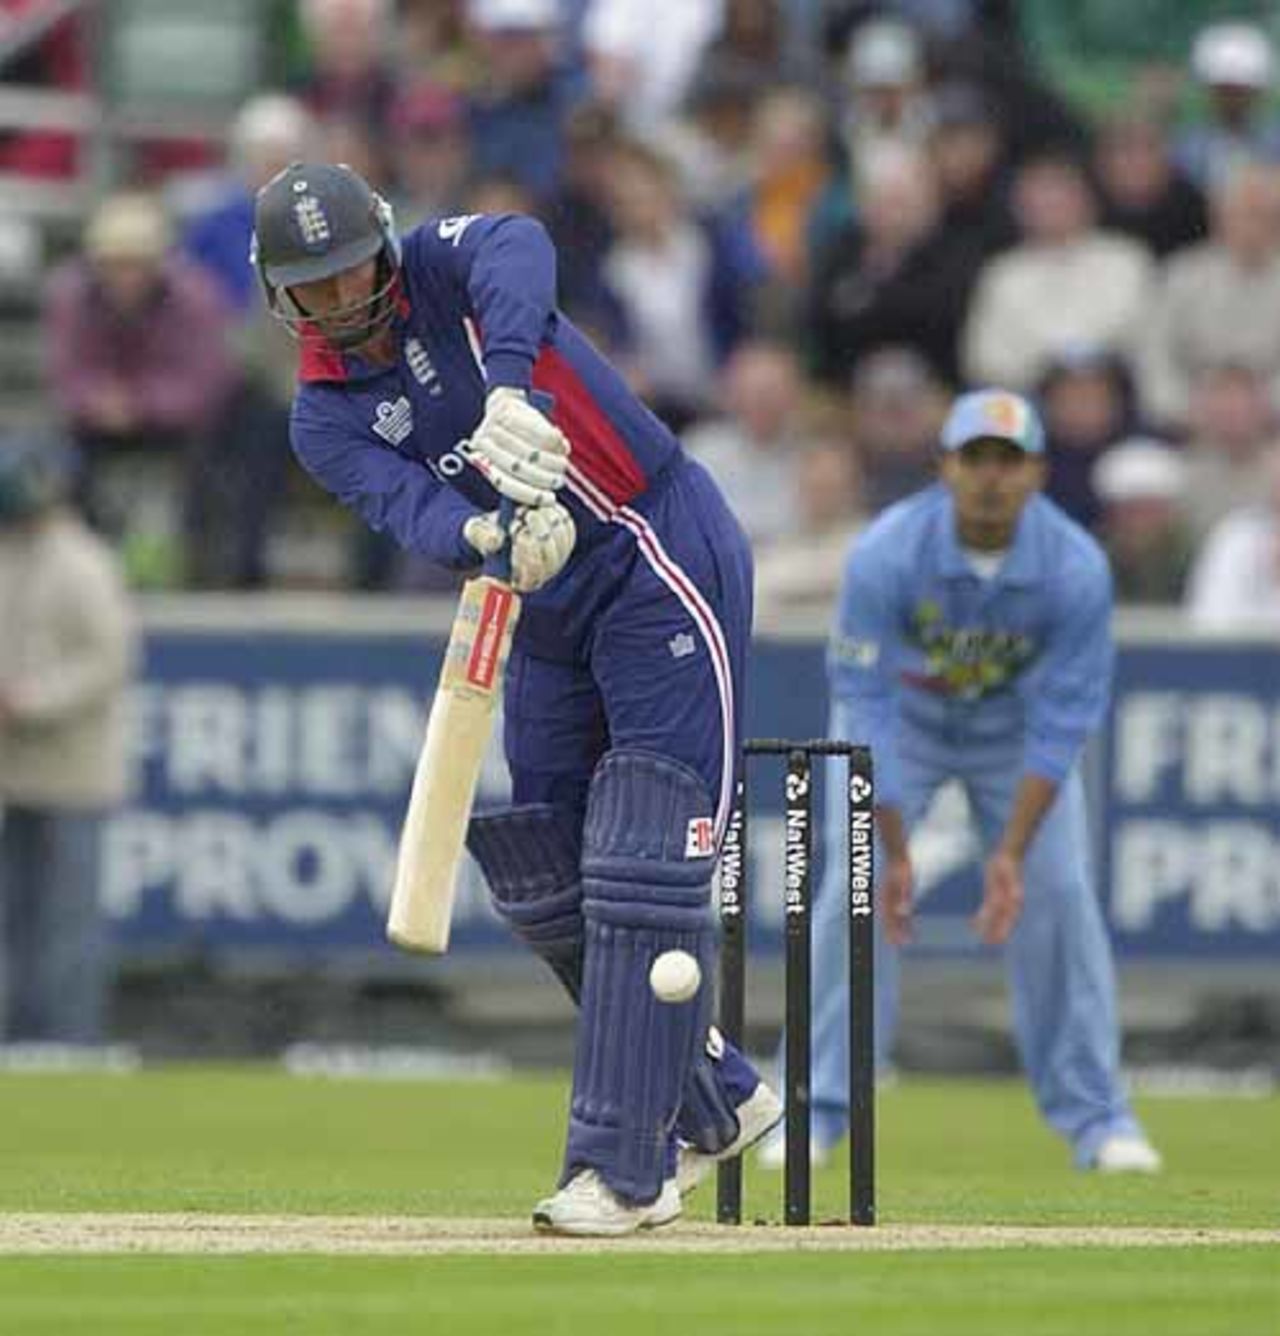 Nasser Hussain plays a ball to leg as the rain starts, England v India at Chester-le-Street, July 2002